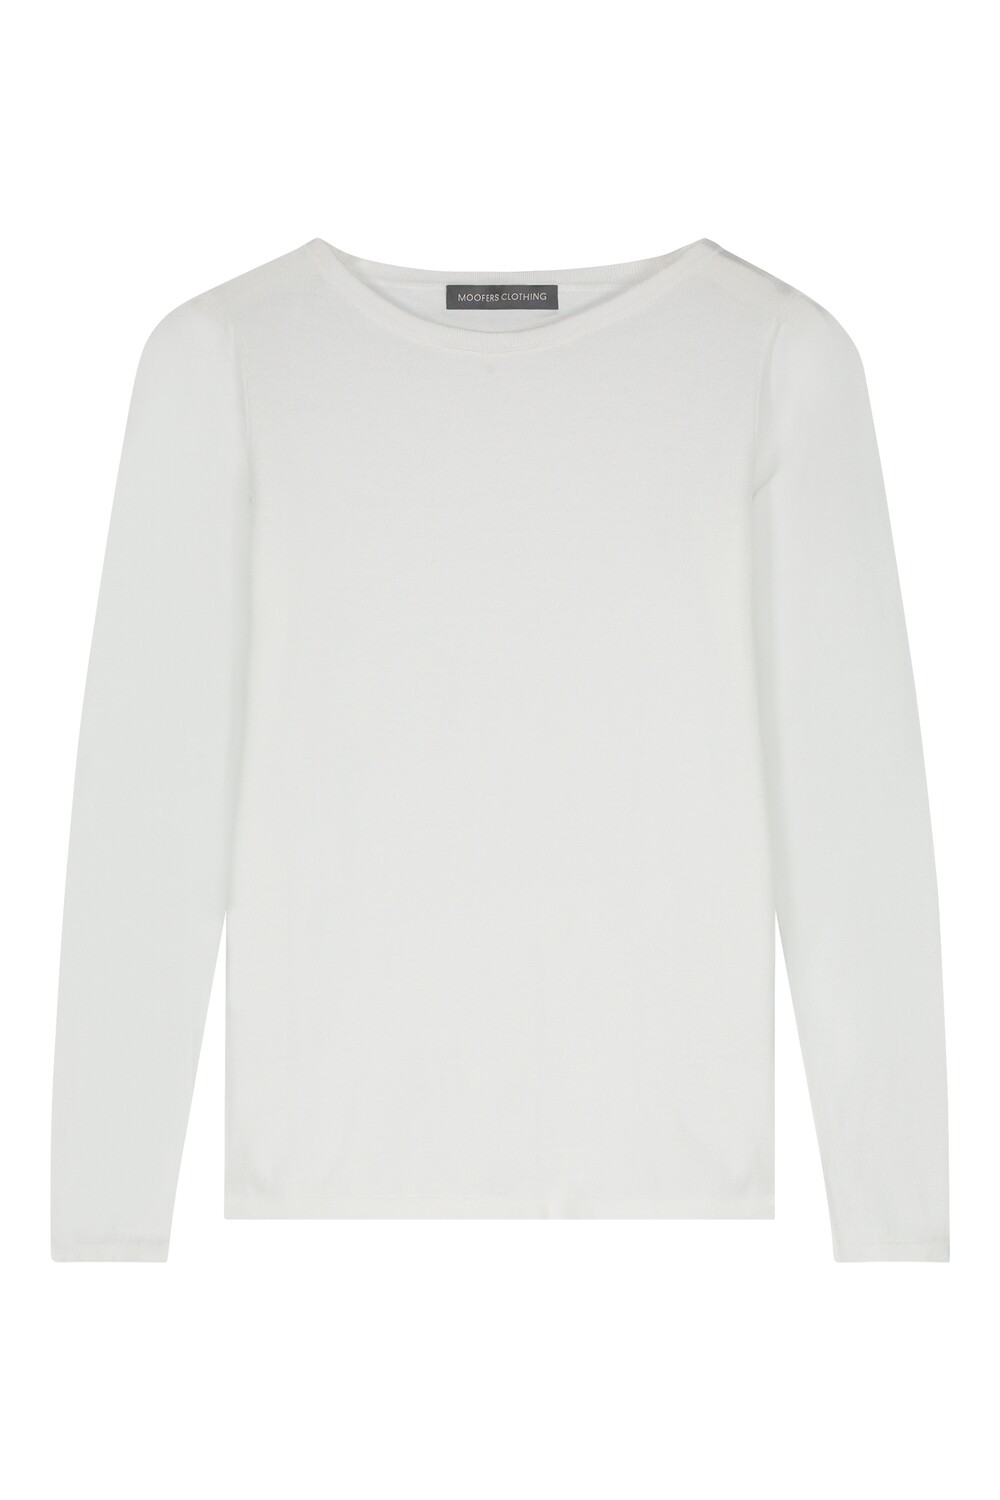 KNITTED T-SHIRT LONG SLEEVE ORGANIC COTTON IN WHITE